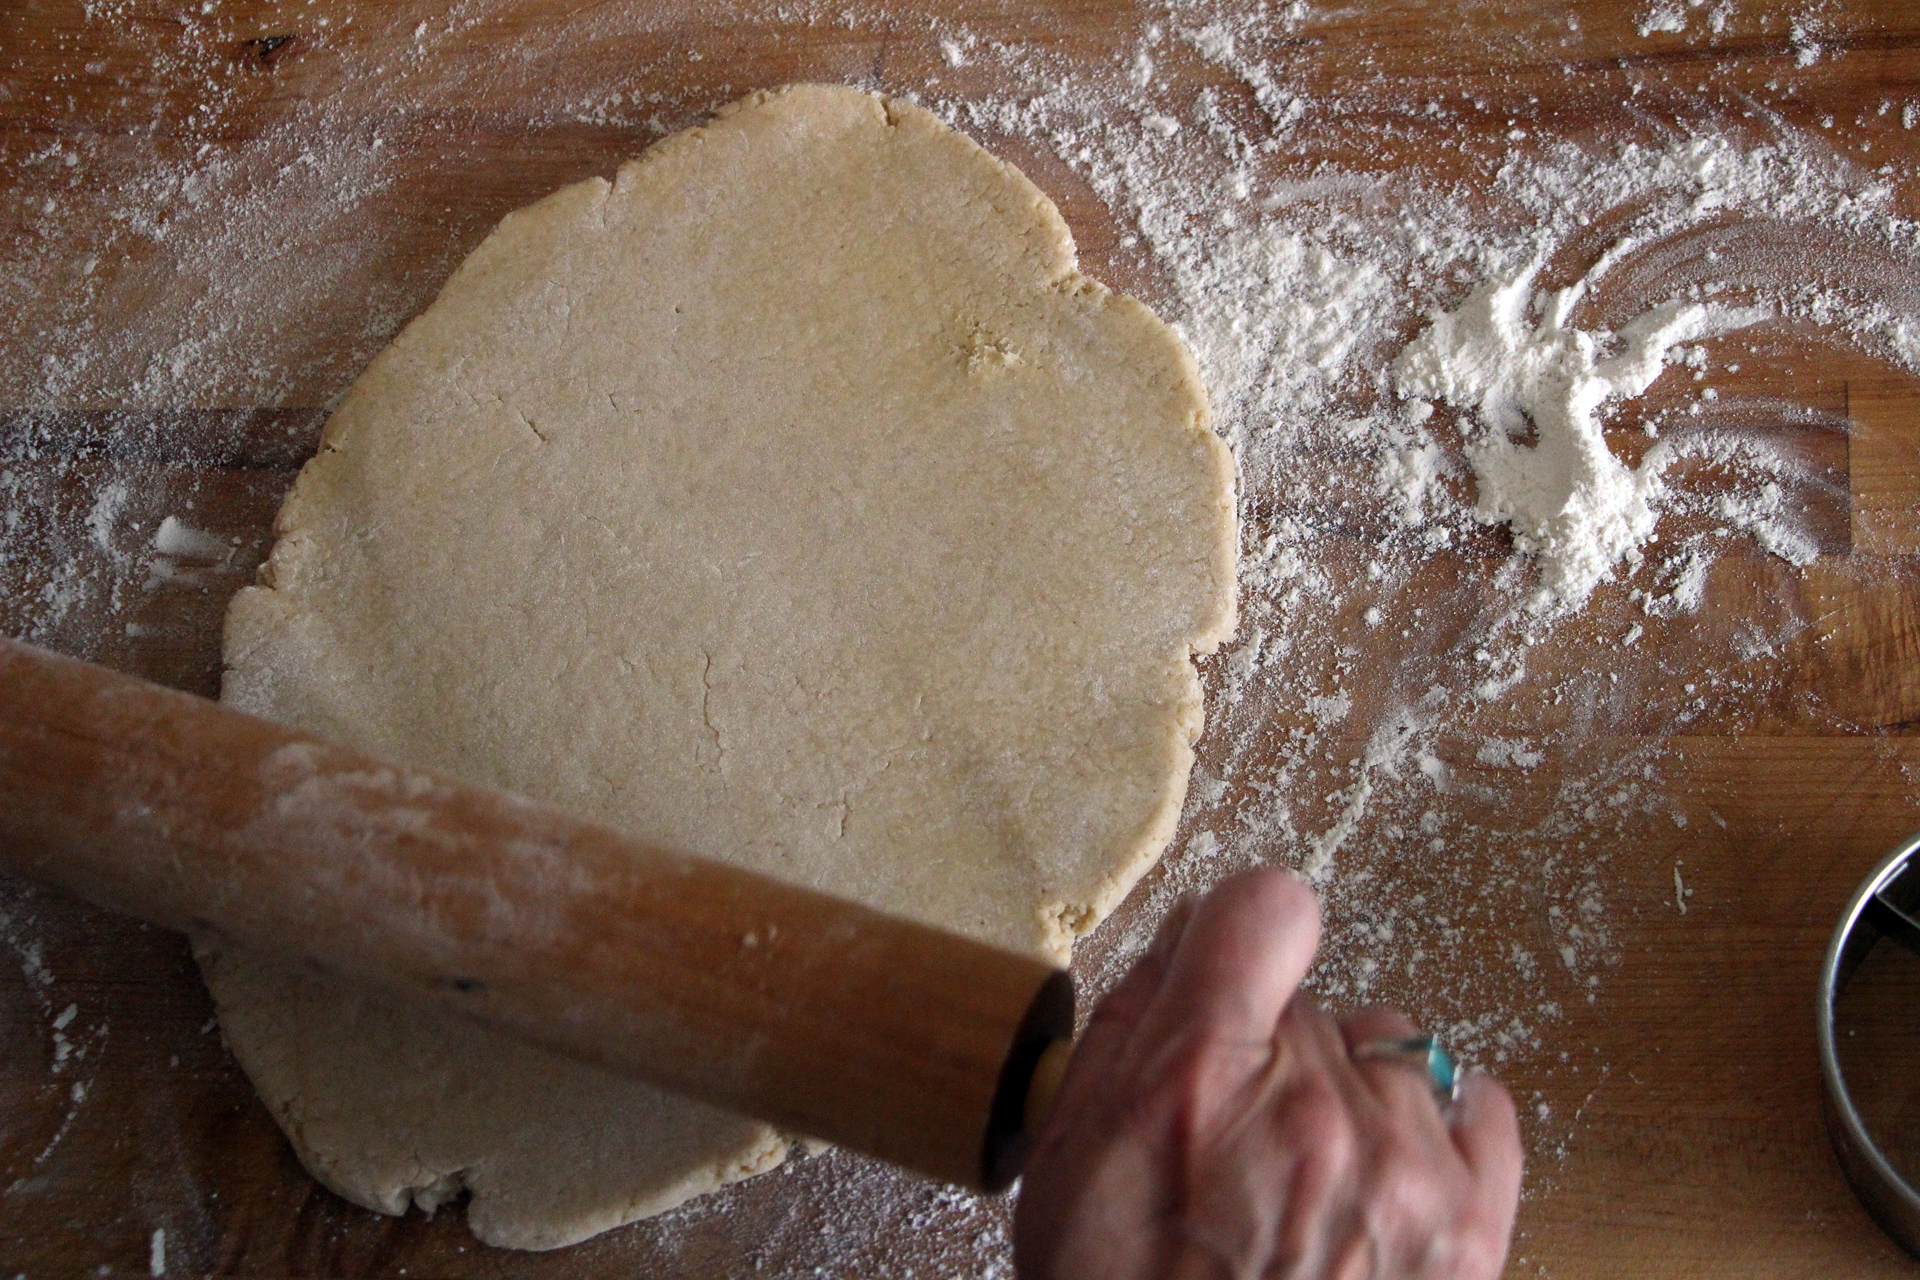 On a floured surface, roll out the dough to 1/2-inch thick.